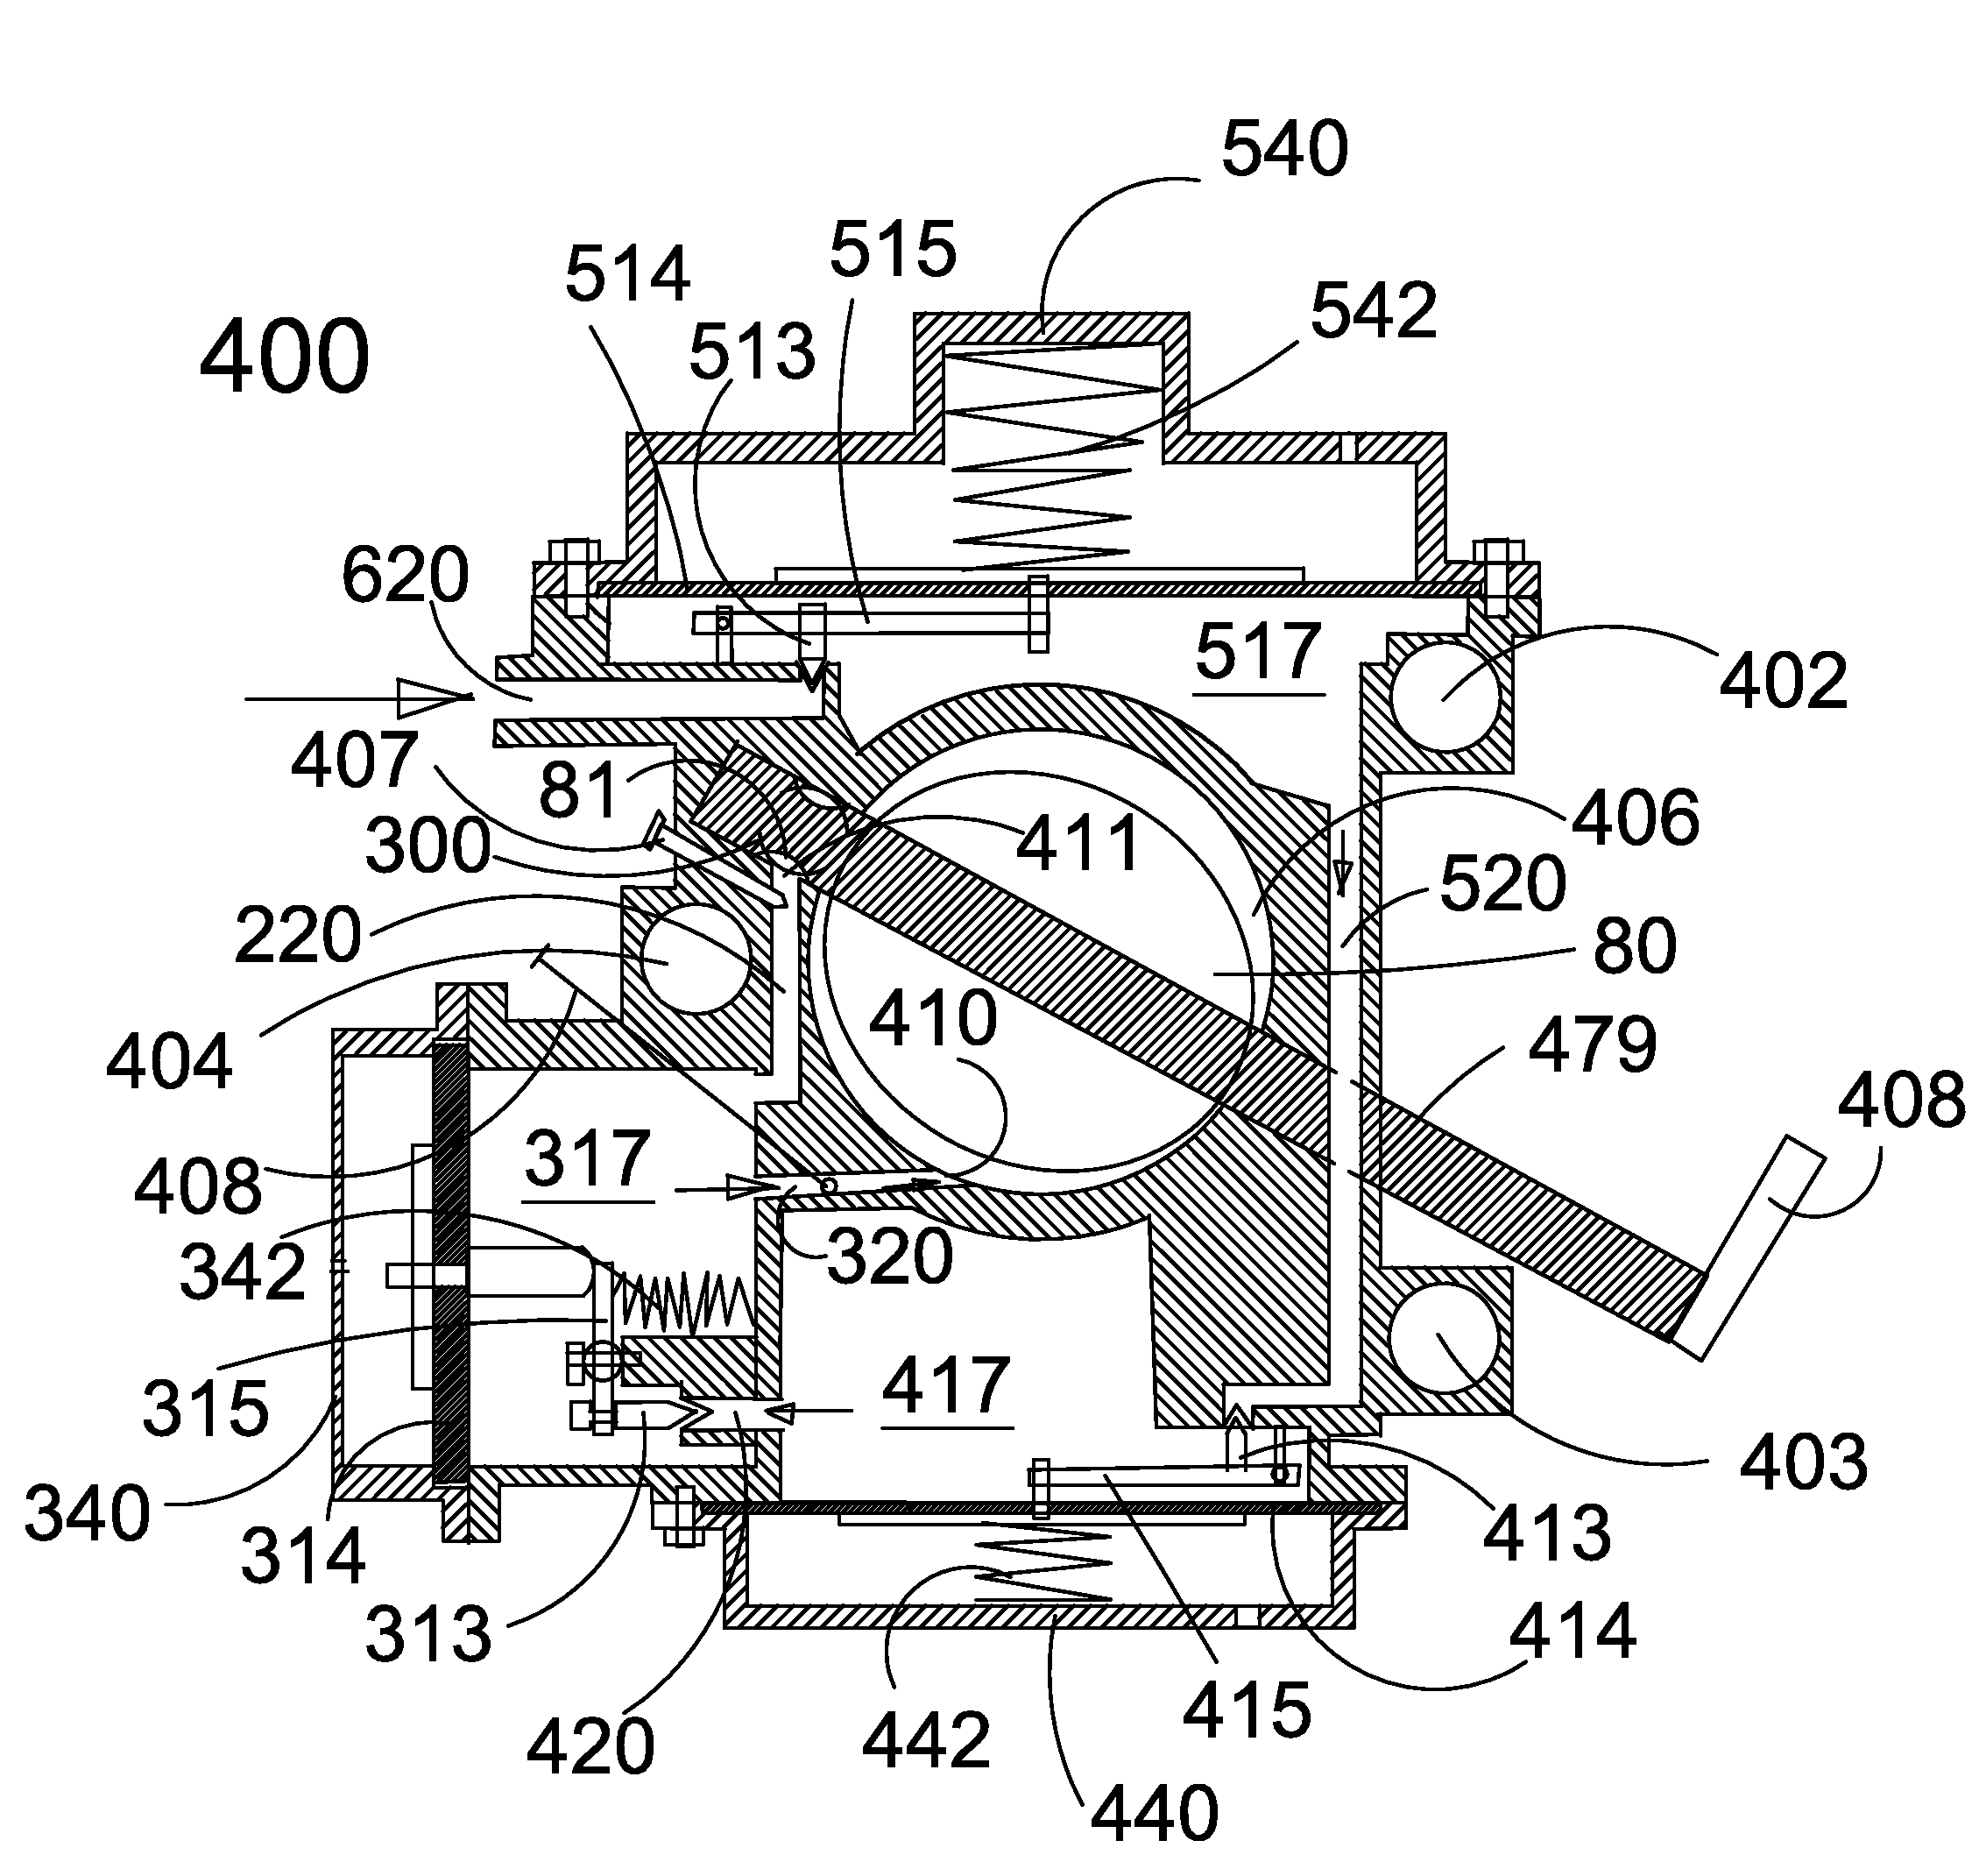 Stratified two-stroke engine and dual passage fuel system